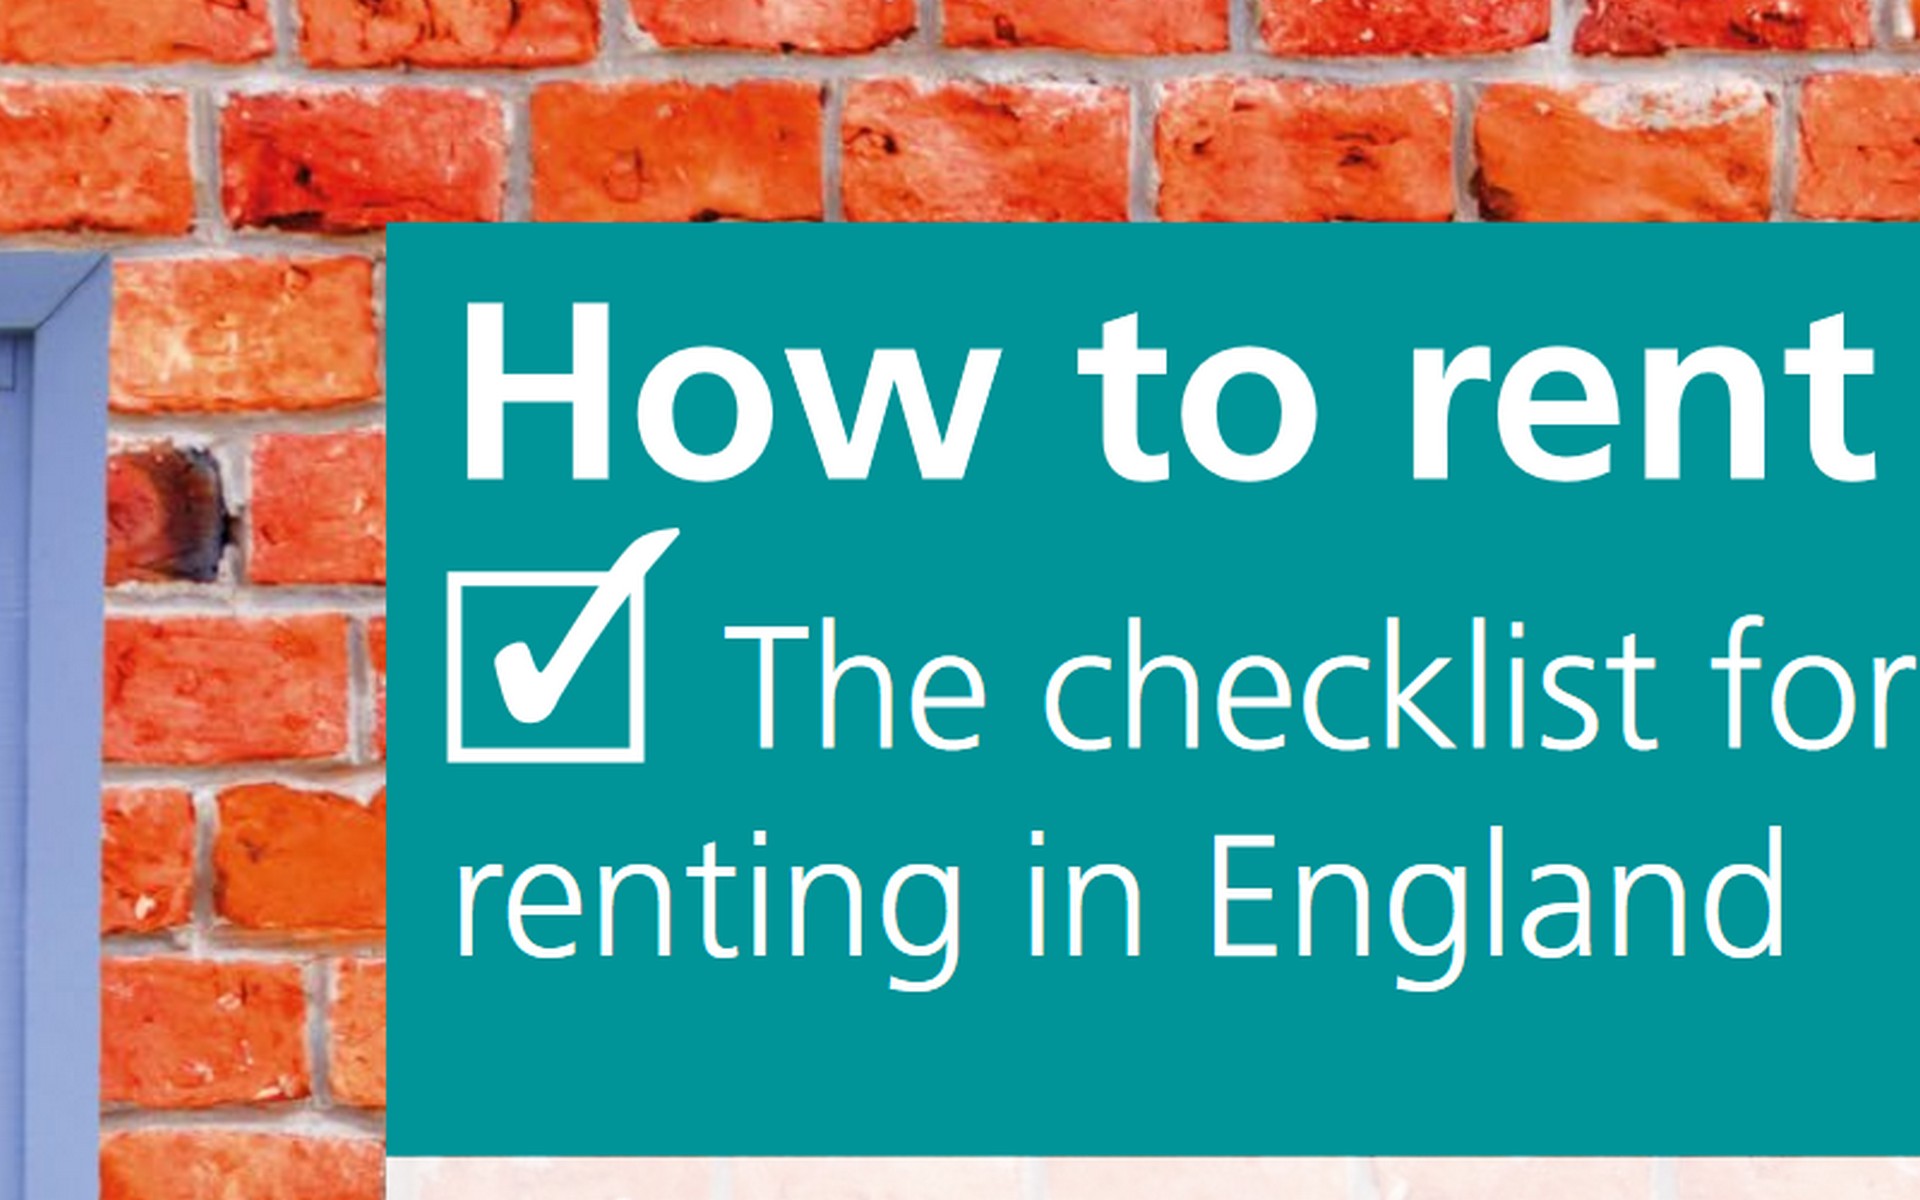 How to Rent Guide